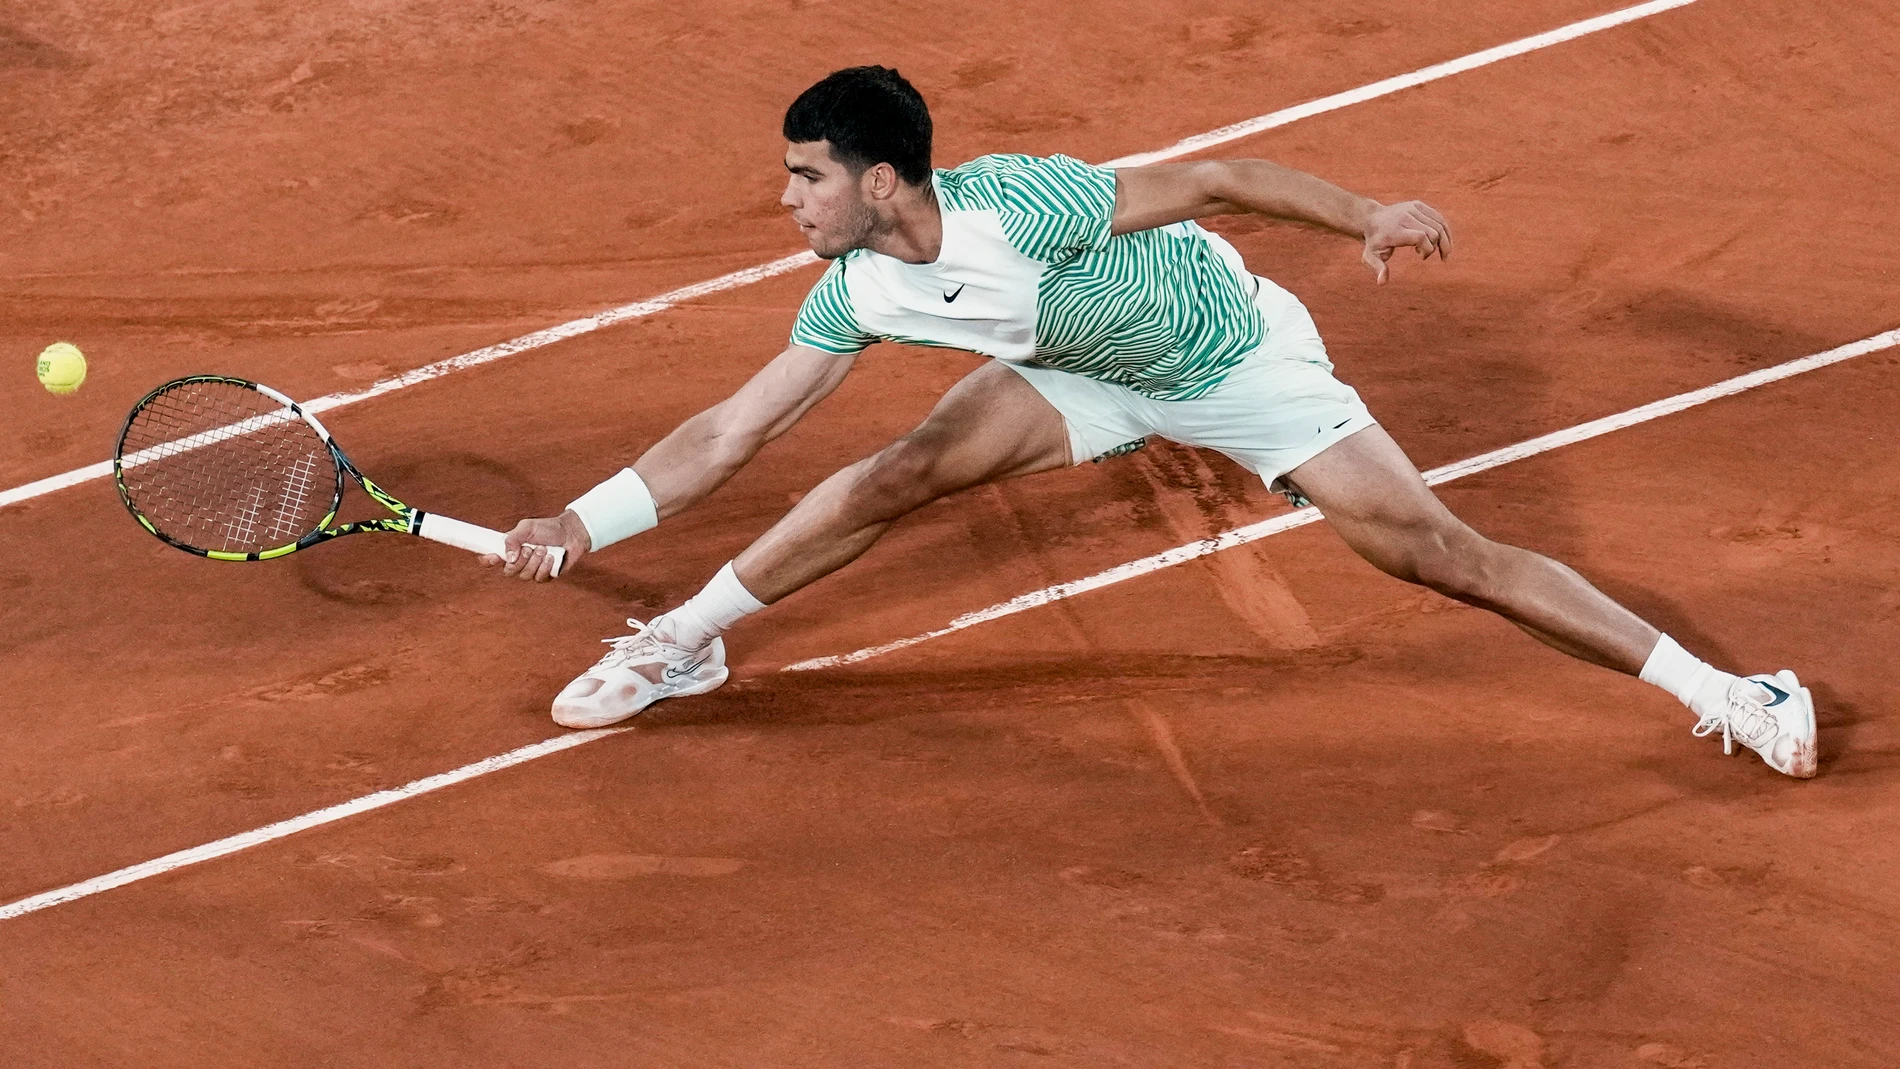 Spain's Carlos Alcaraz plays a shot against Canada's Denis Shapovalov during their third round match of the French Open tennis tournament at the Roland Garros stadium in Paris, Friday, June 2, 2023. (AP Photo/Christophe Ena)